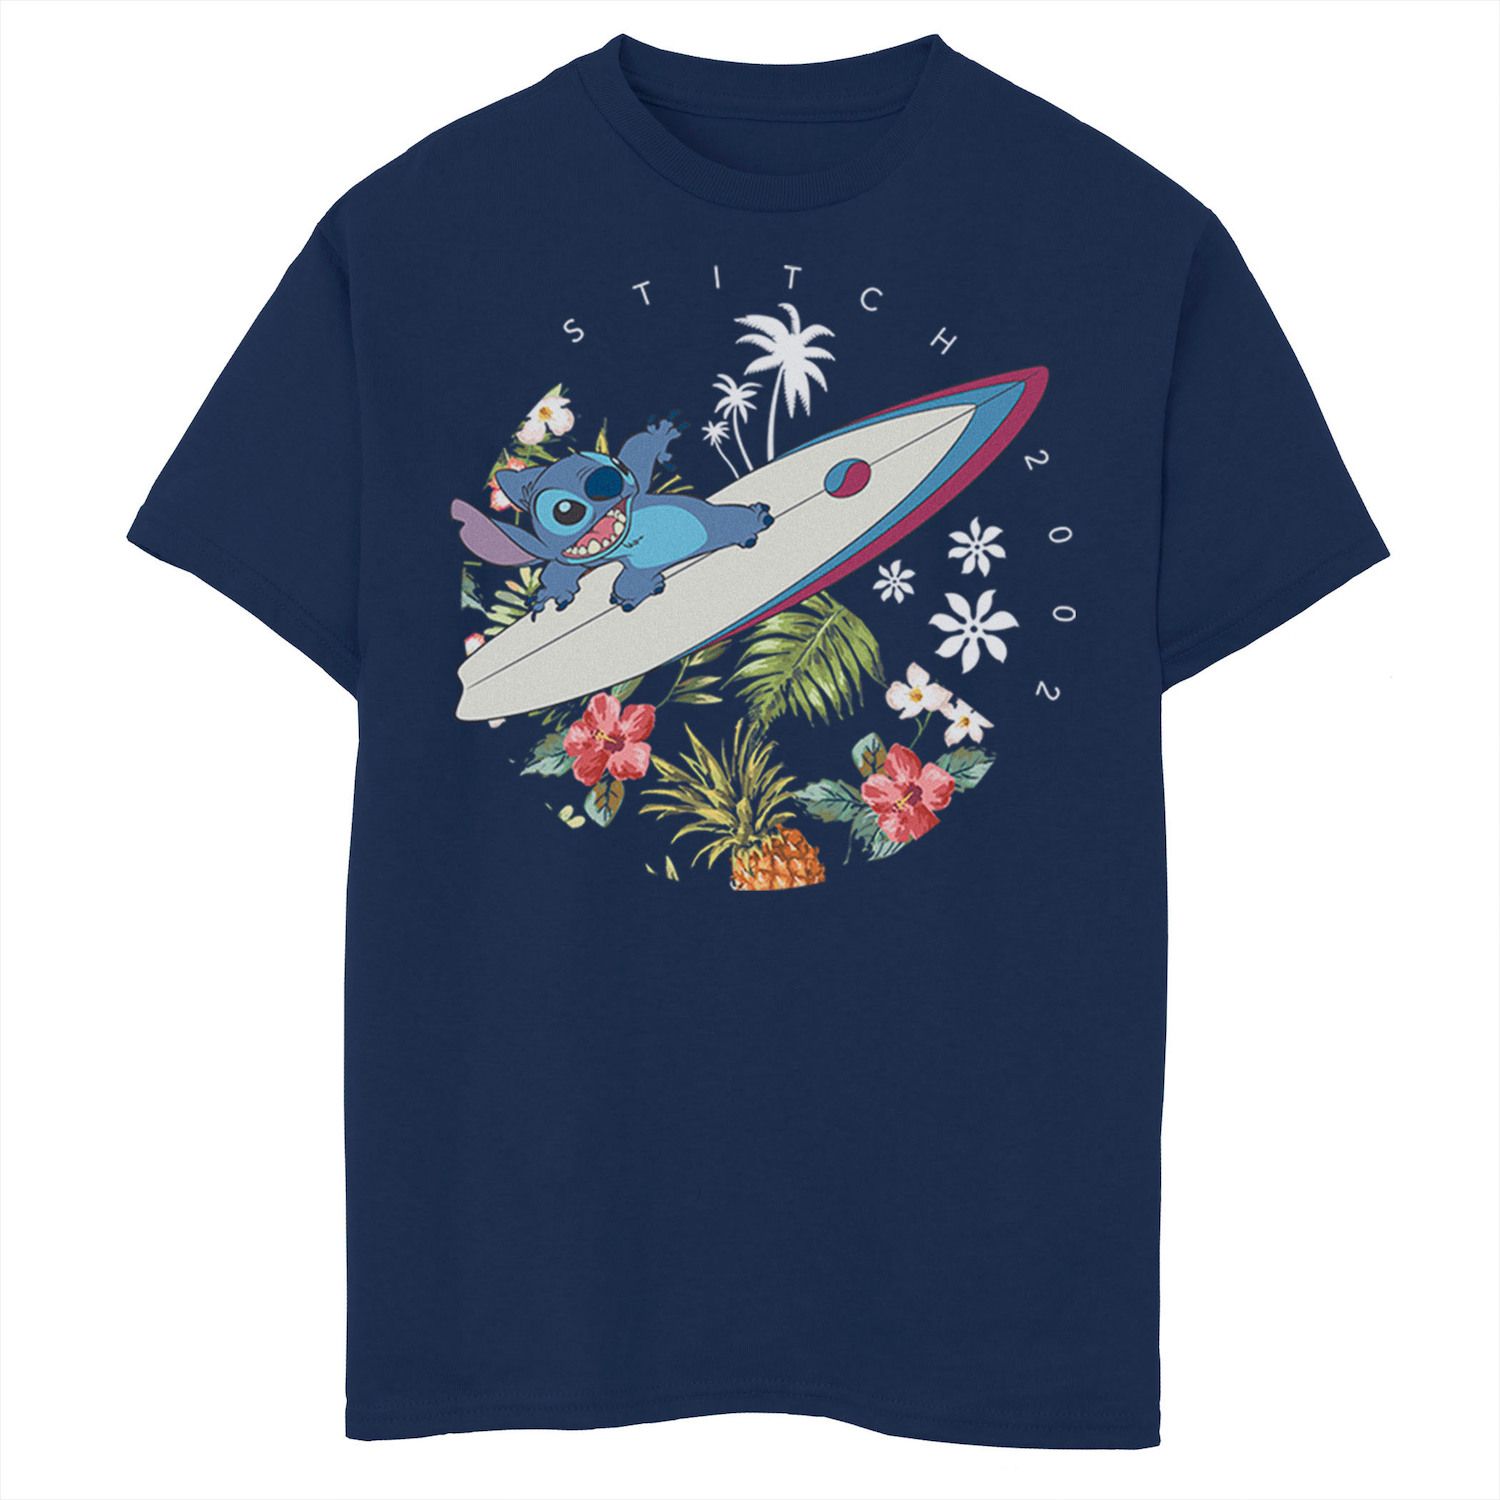 Image for Disney s Lilo & Stitch Boys 8-20 Surfing Tropical Circle Portrait Graphic Tee at Kohl's.